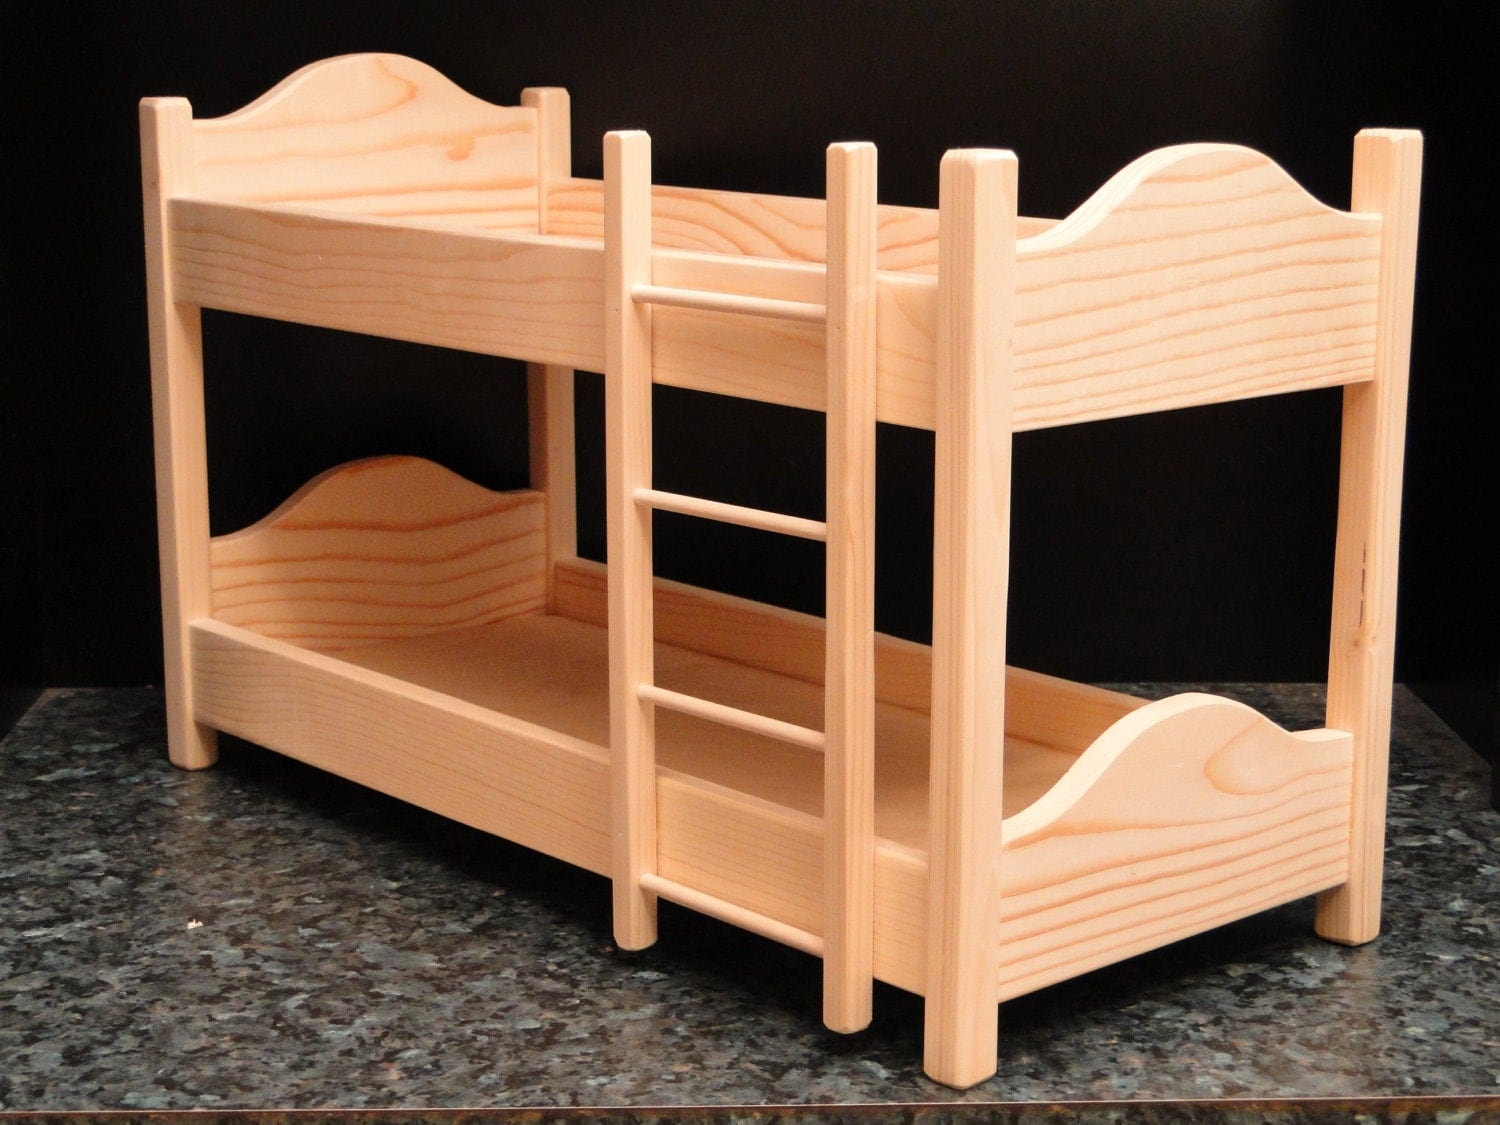 Bunk Beds for 18 inch Dolls 074 by ToysByJohn on Etsy